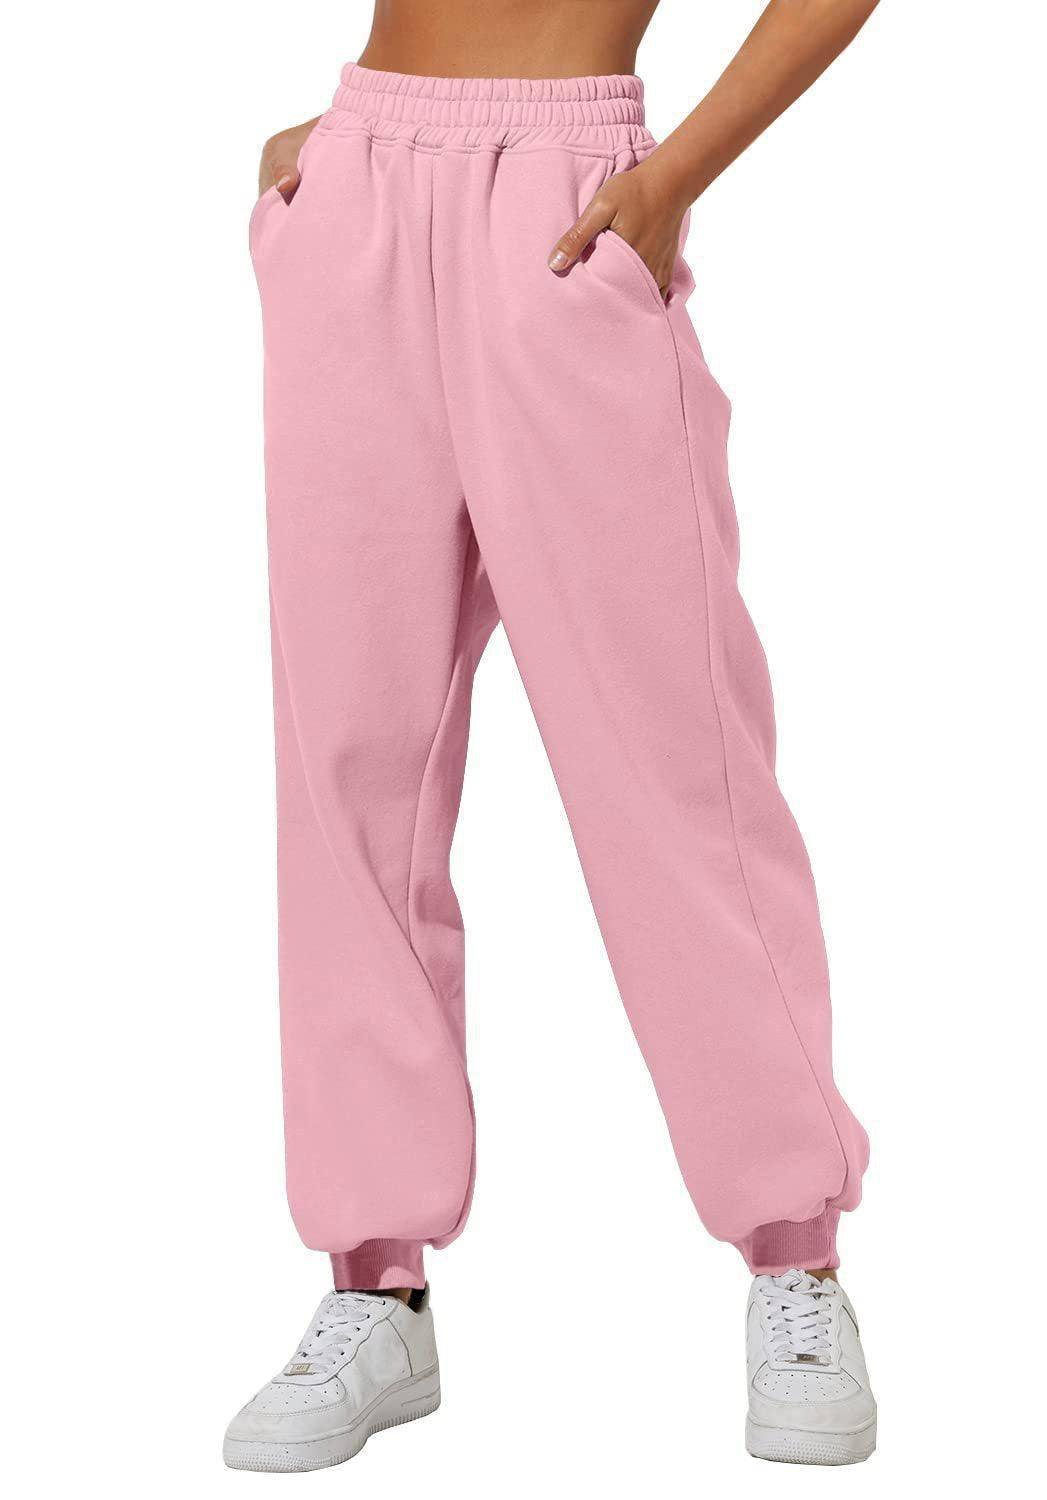 Women's Trousers With Pockets High Waist Loose Jogging-Light Pink-14